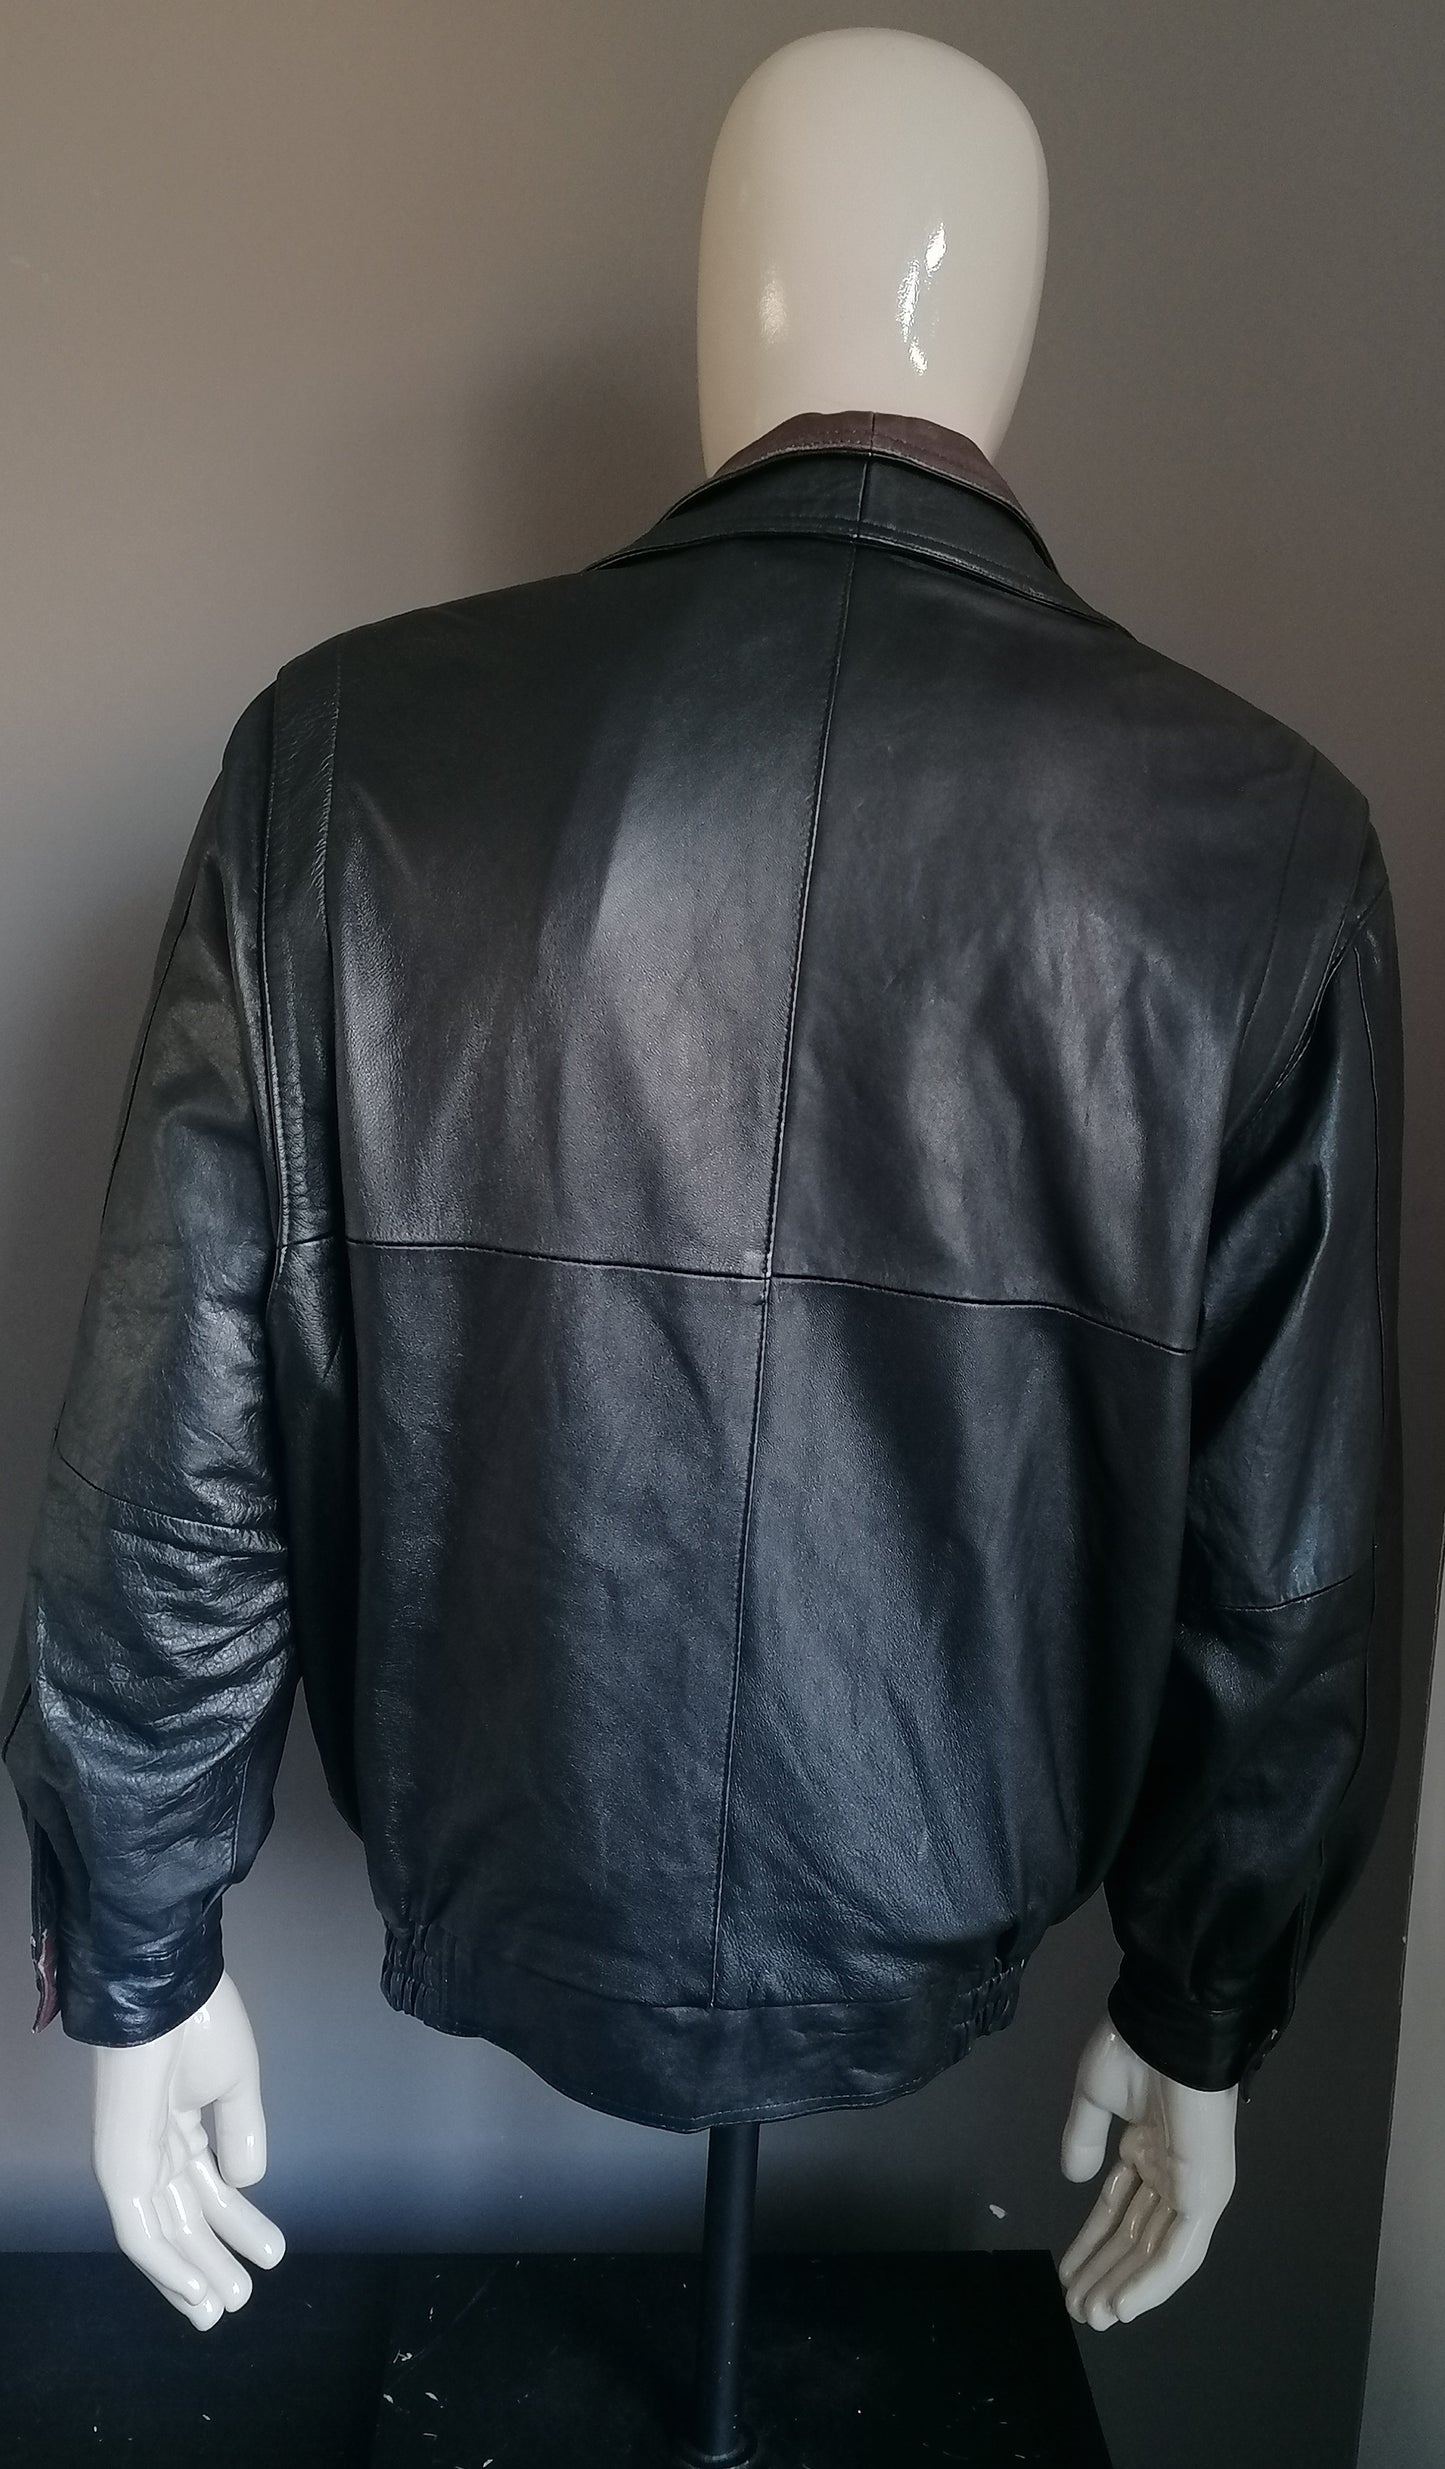 Vintage 80s-90s leather jacket with double closure. Brown black colored. Size L / XL.